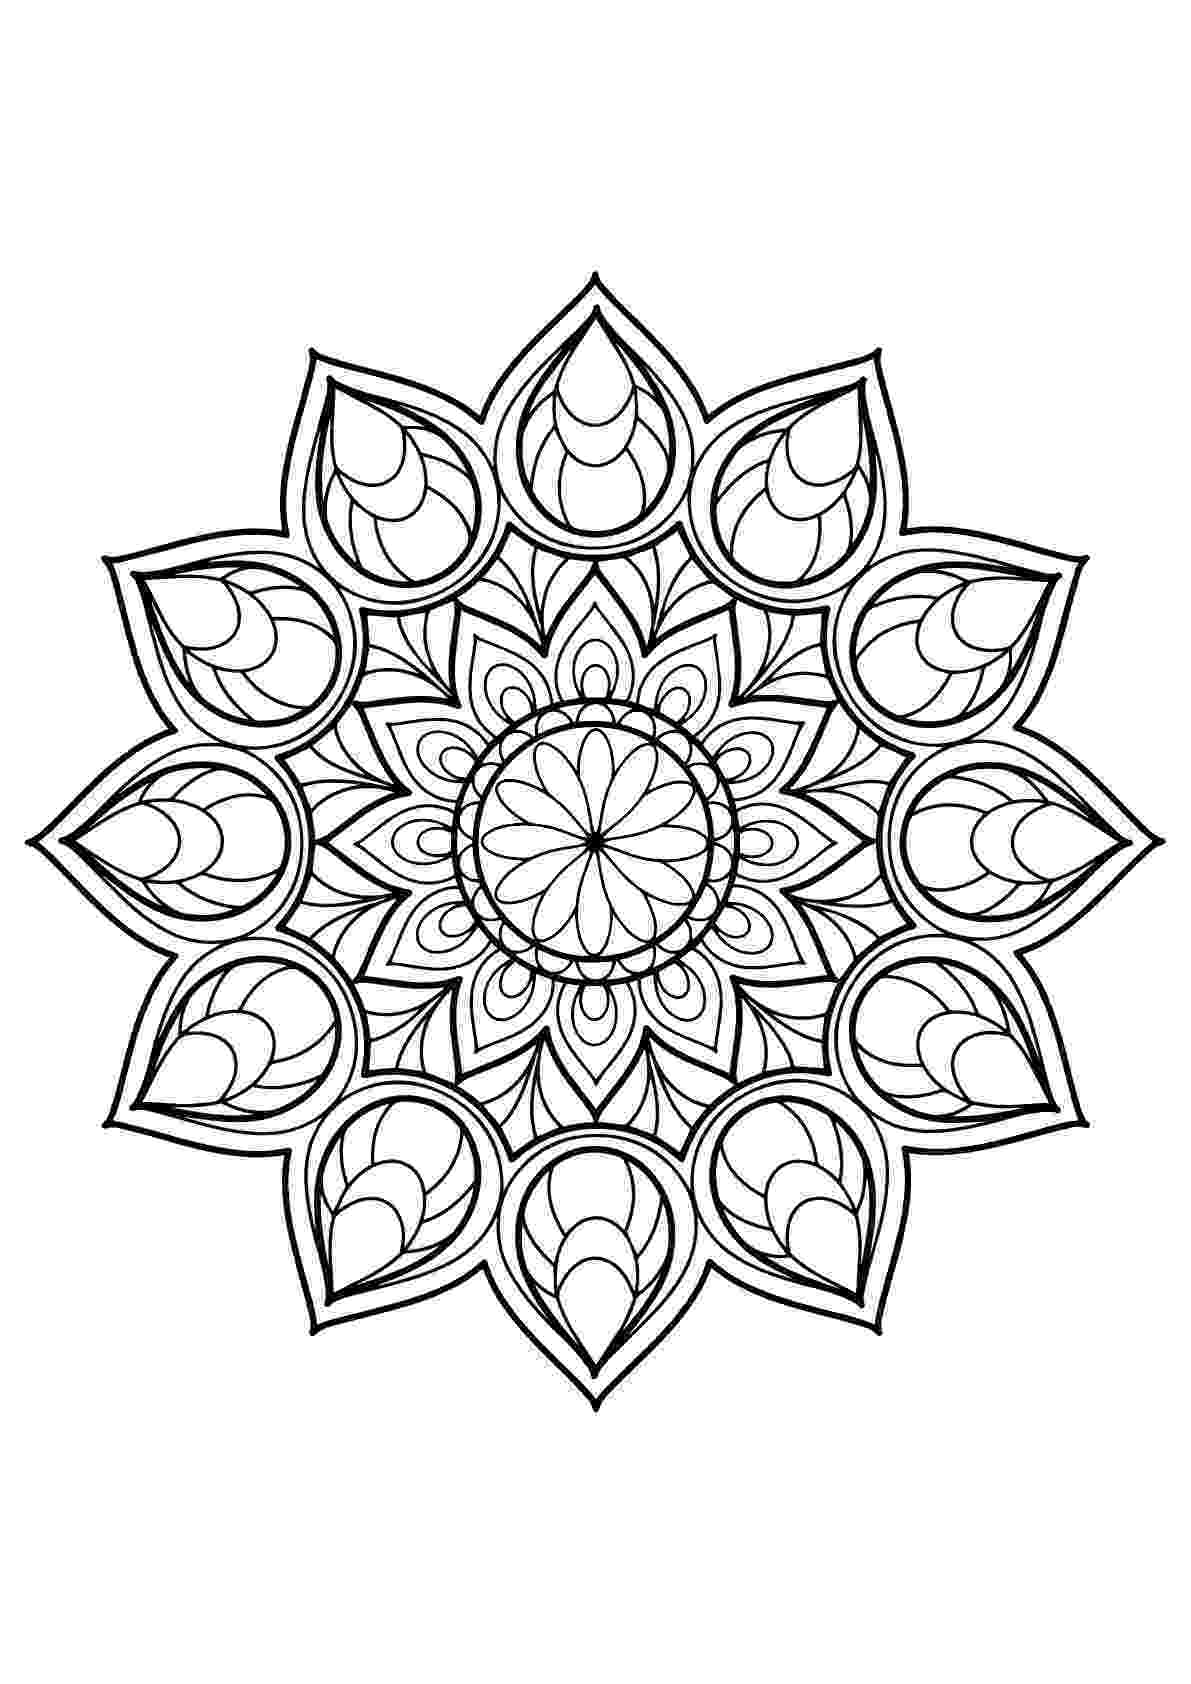 mandala coloring pages for adults free coloring sheet for kids coloring pages blog coloring pages mandala adults for free 